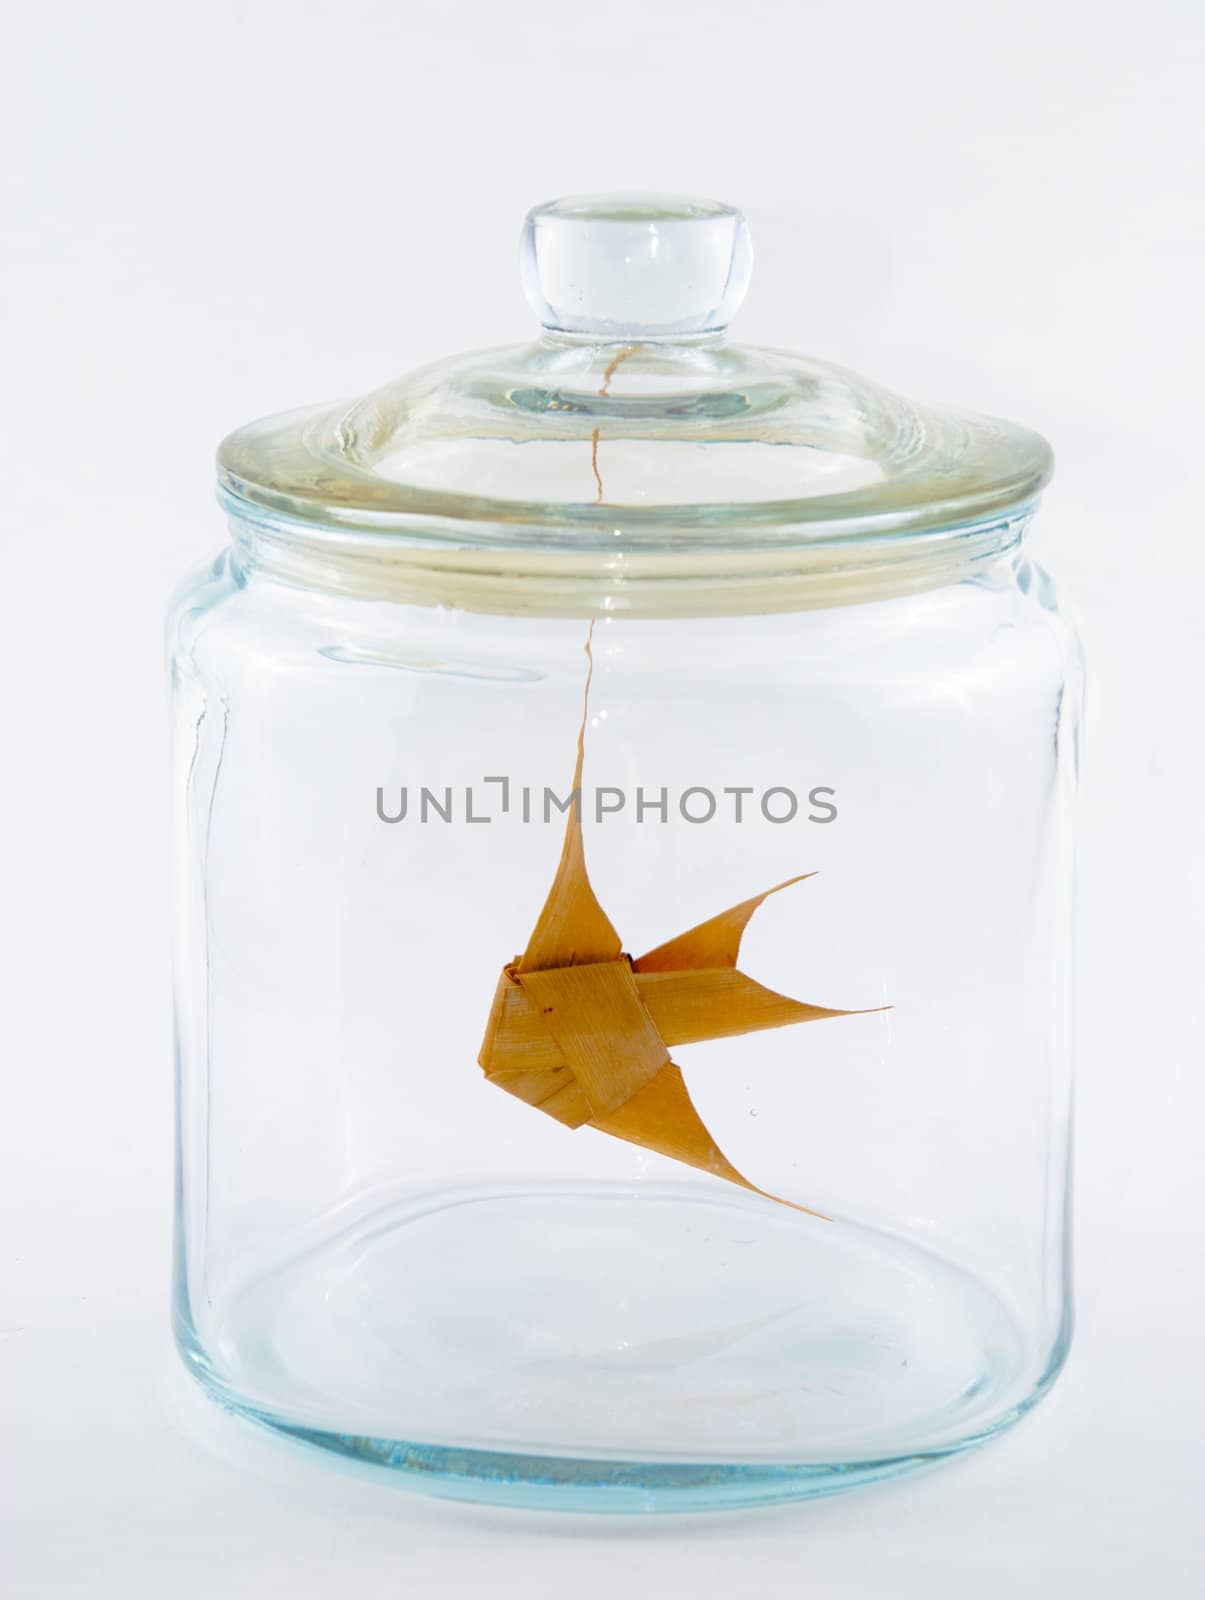 Fish in a glass jar by 300pixel